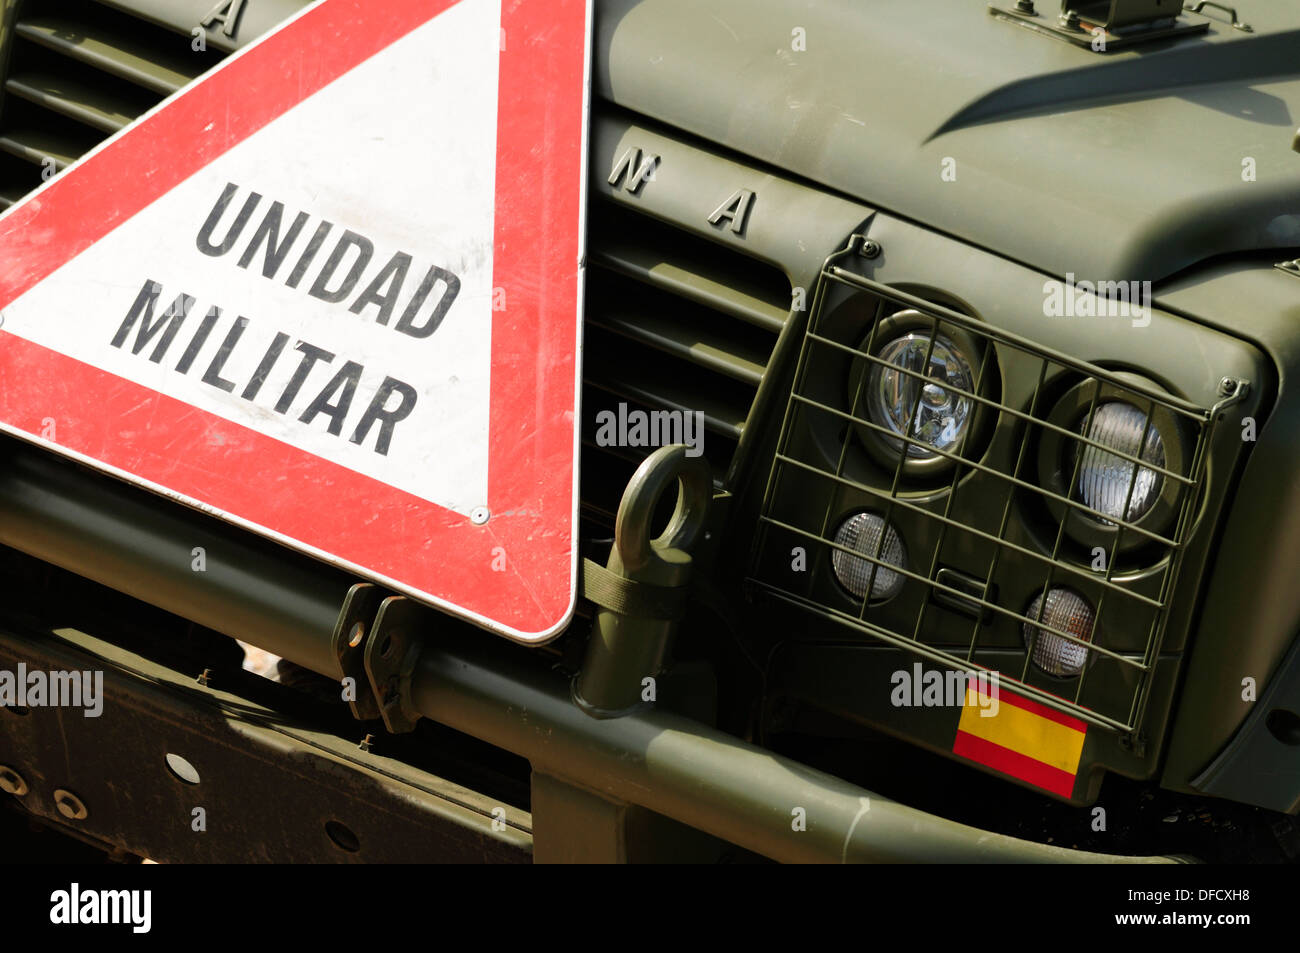 Spanish military unit sign on the front of a car. Stock Photo